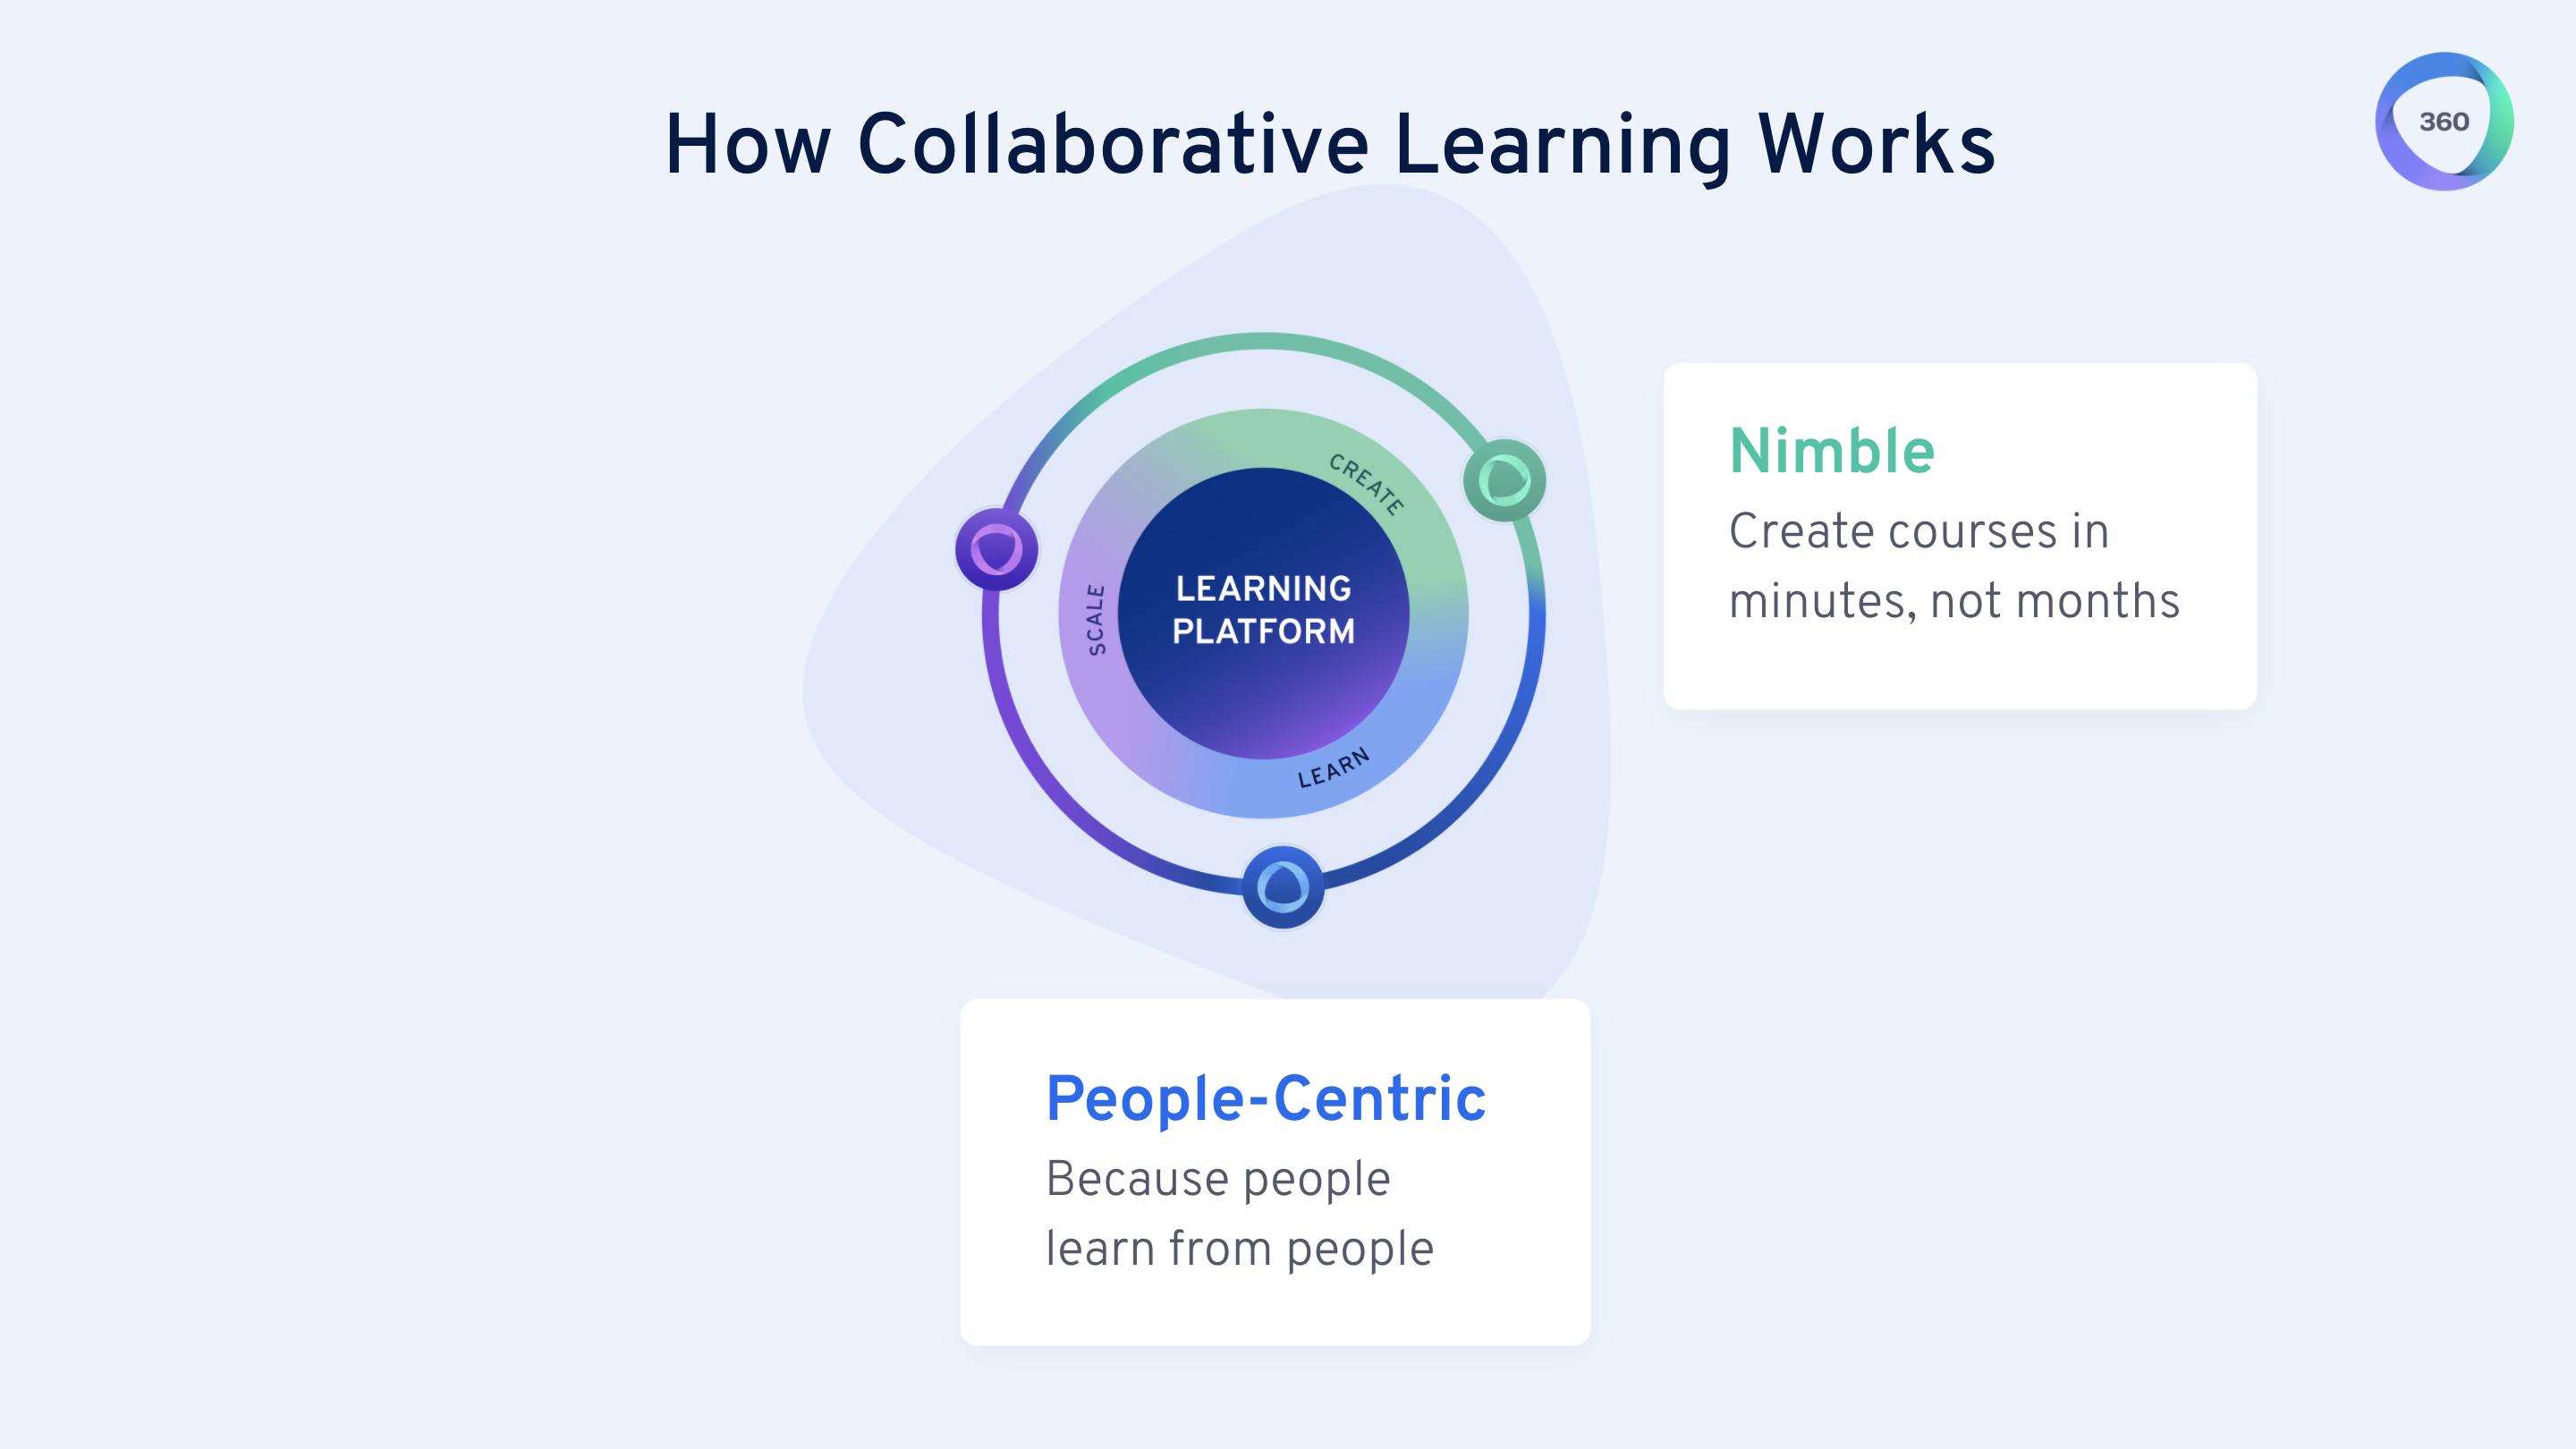 Collaborative Learning is people-centric